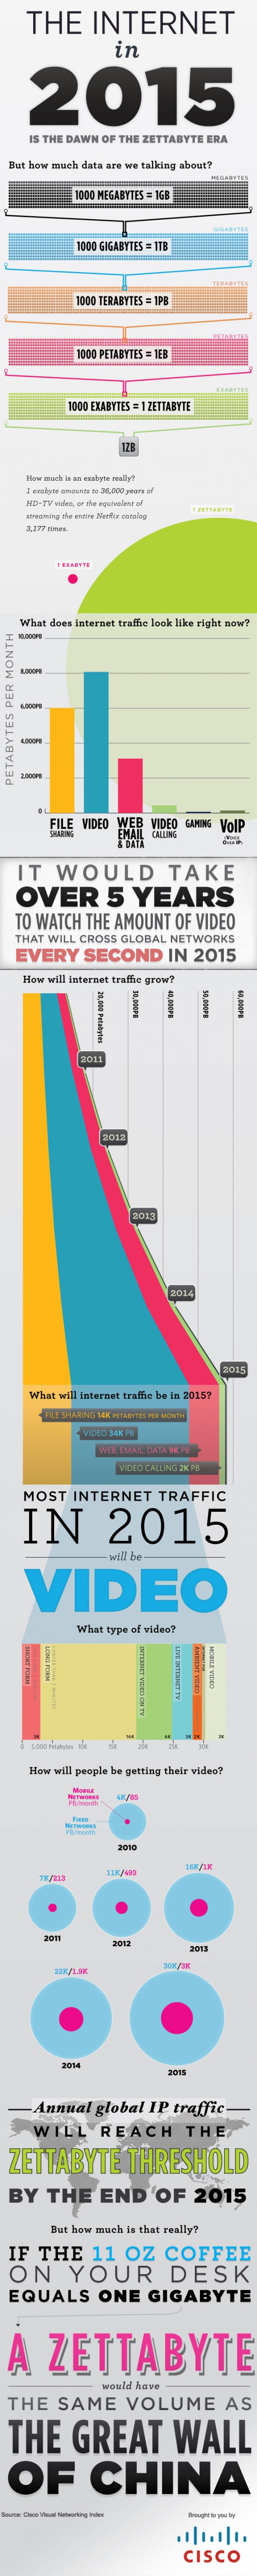 HOW BIG WILL THE INTERNET BE IN 2015?